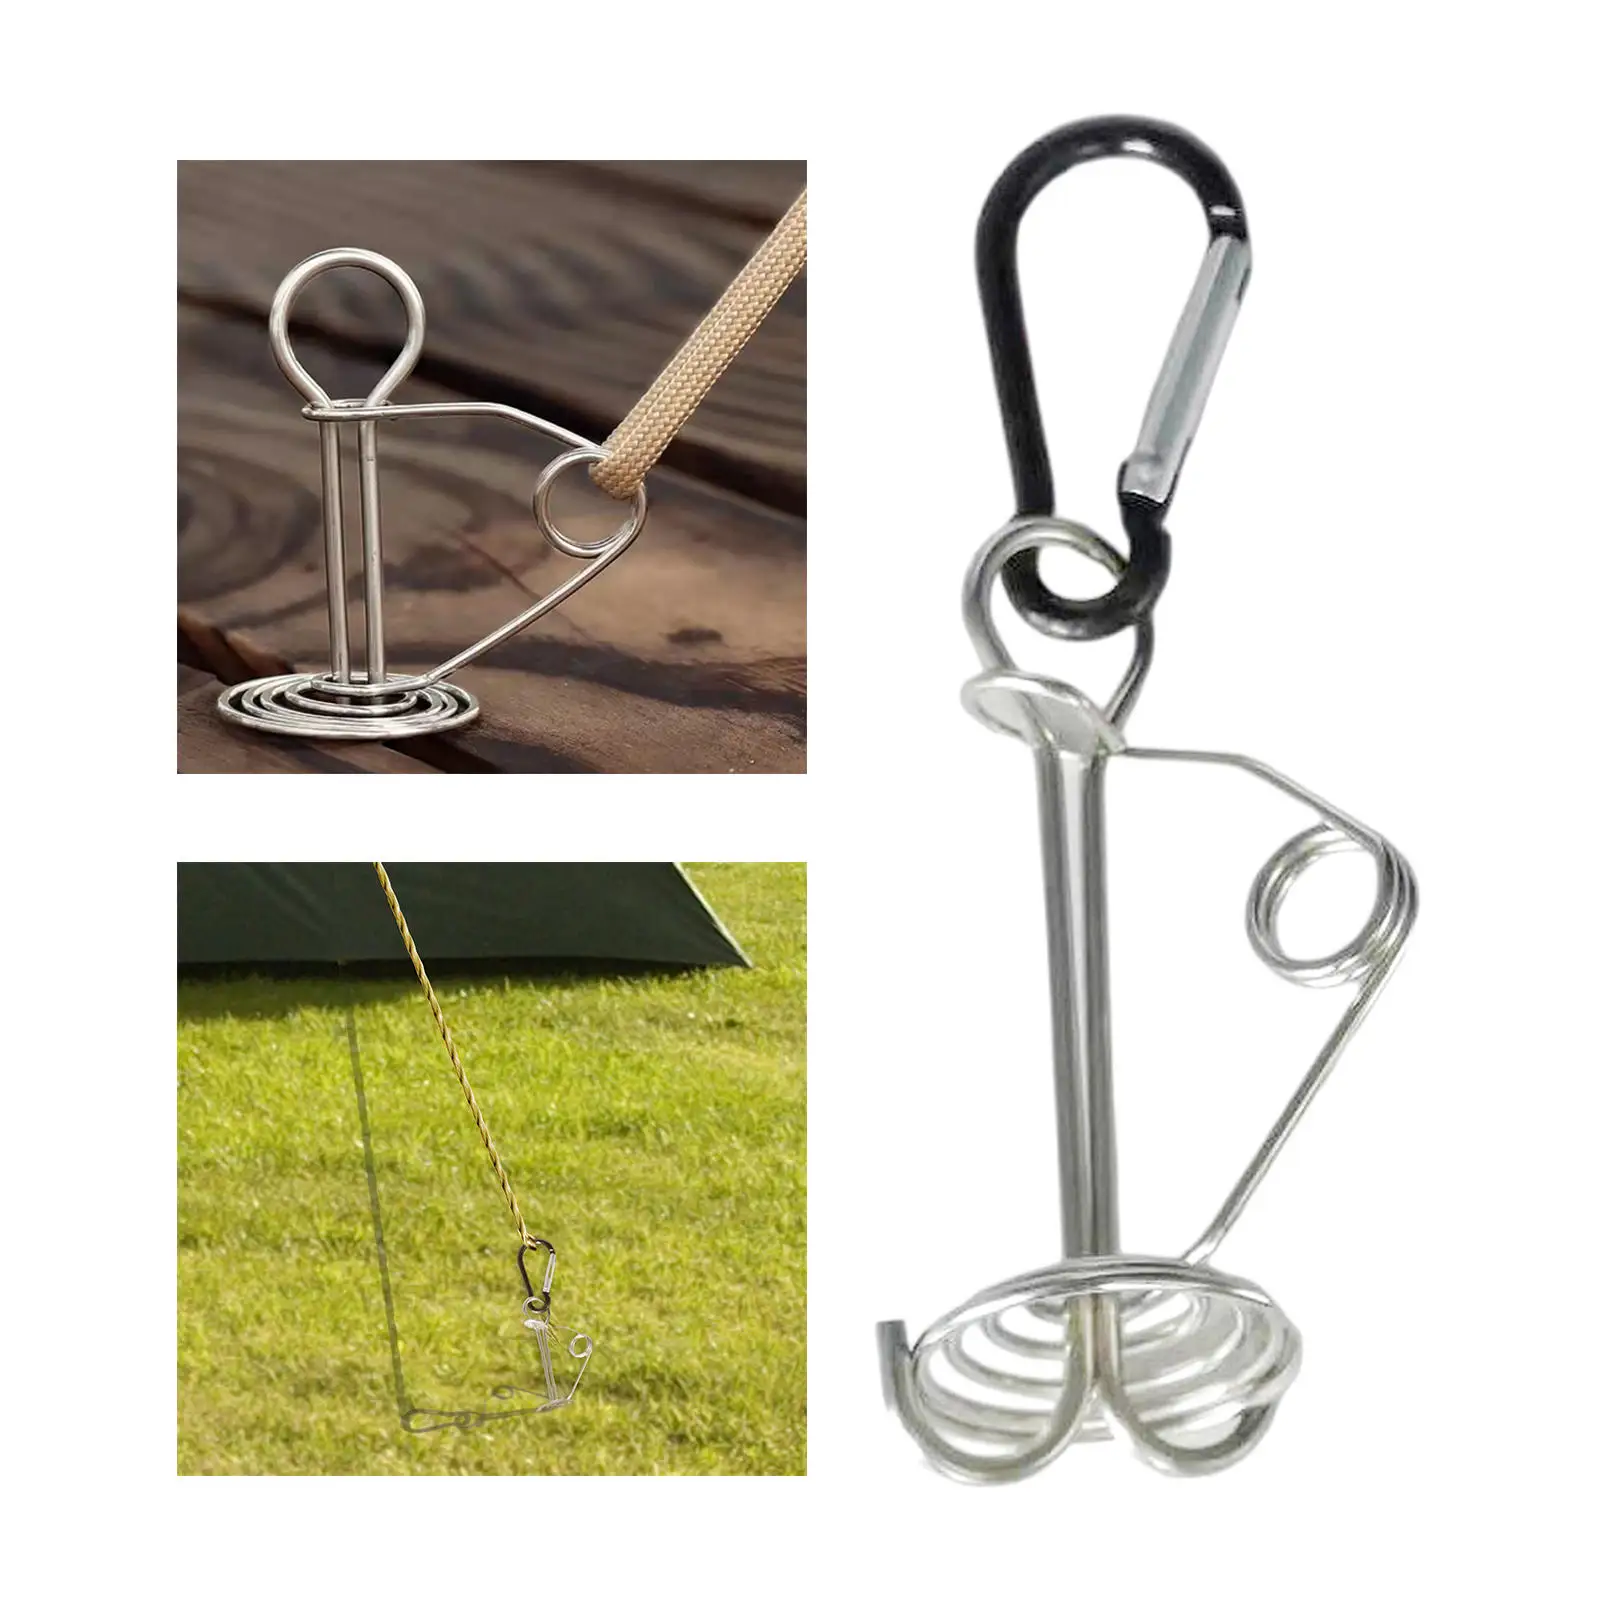 10x Spiral Tent Stakes with Spring Buckle Anti-Tripping Awning Octopus Portable Deck Anchor Peg Board Peg for Gallery Hiking